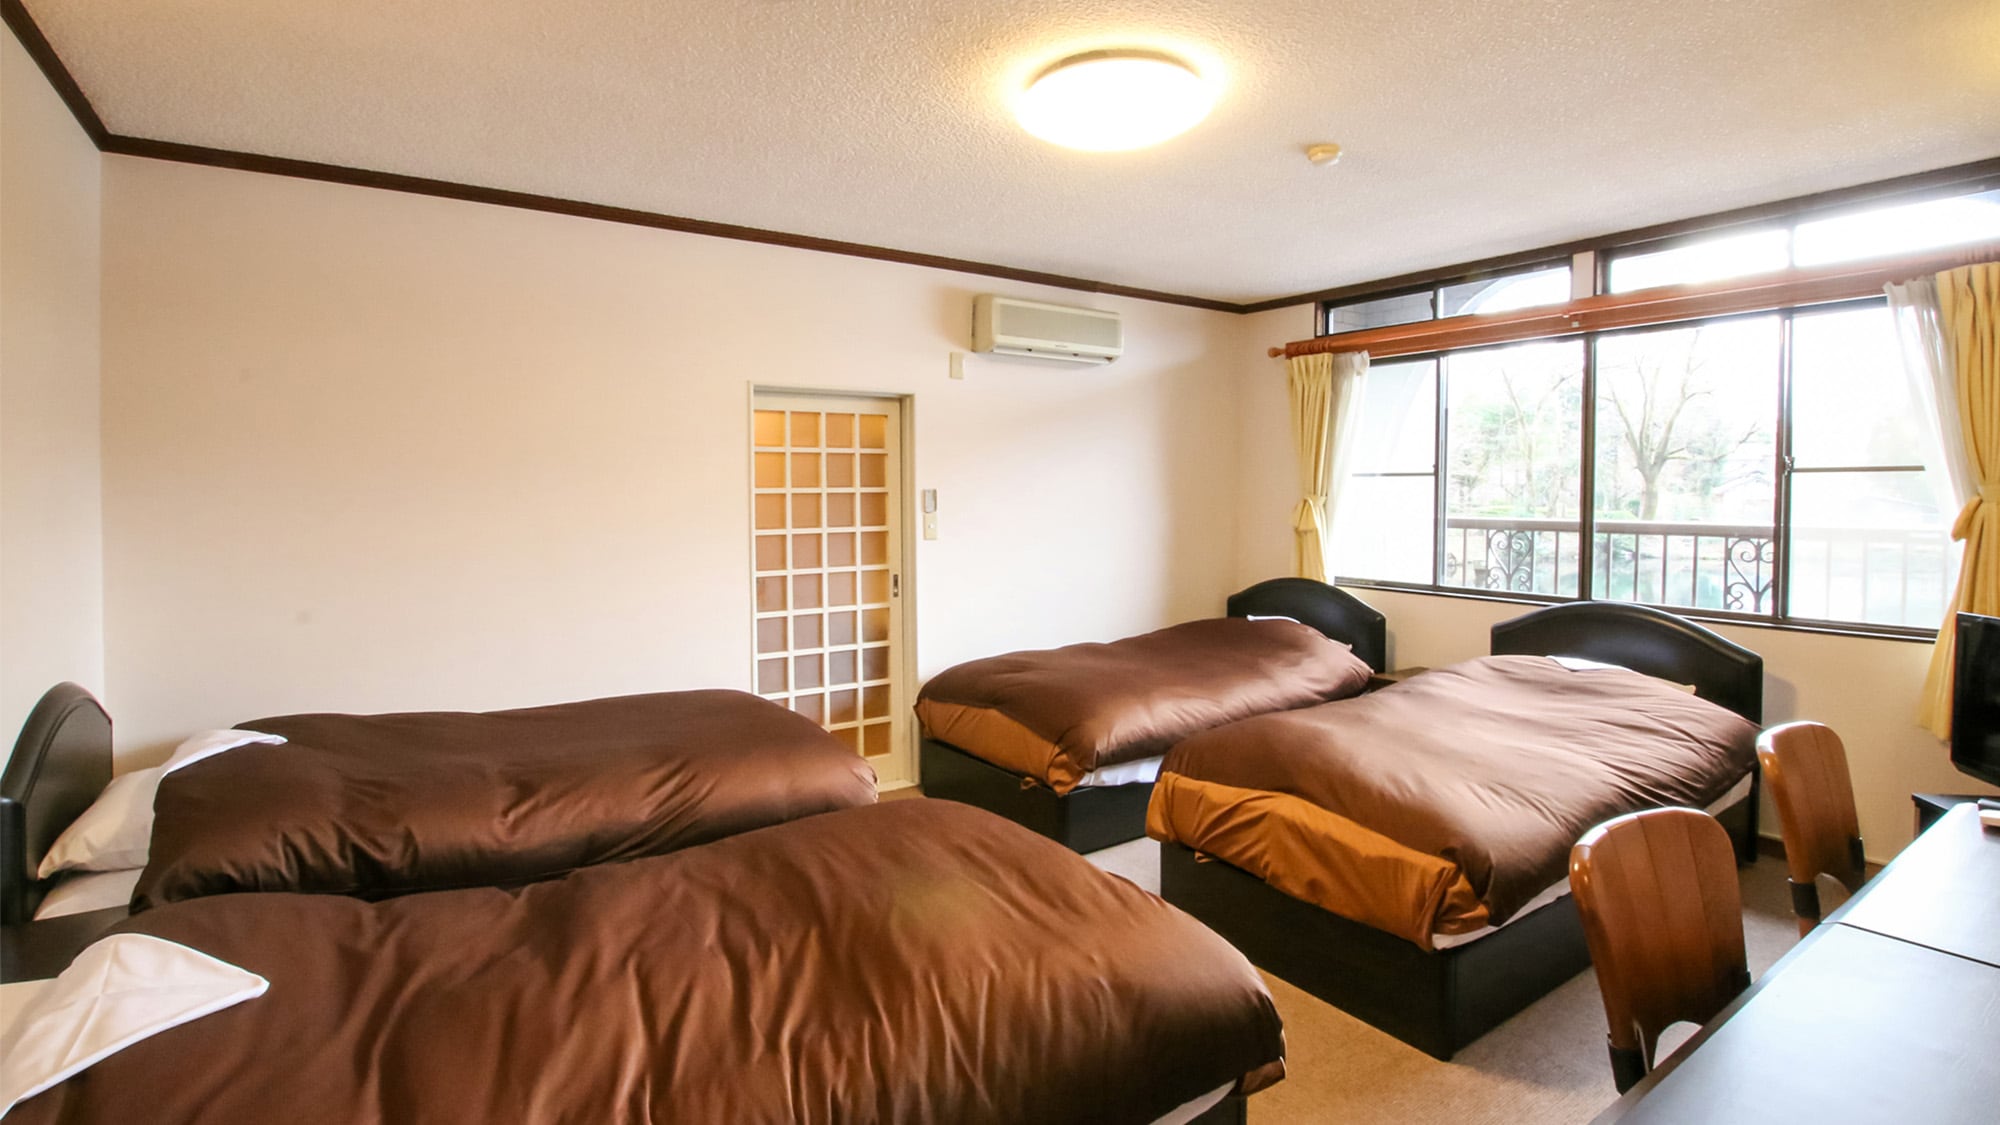 ・ [4 bedrooms] Recommended for family trips. Room with 4 beds overlooking the lake